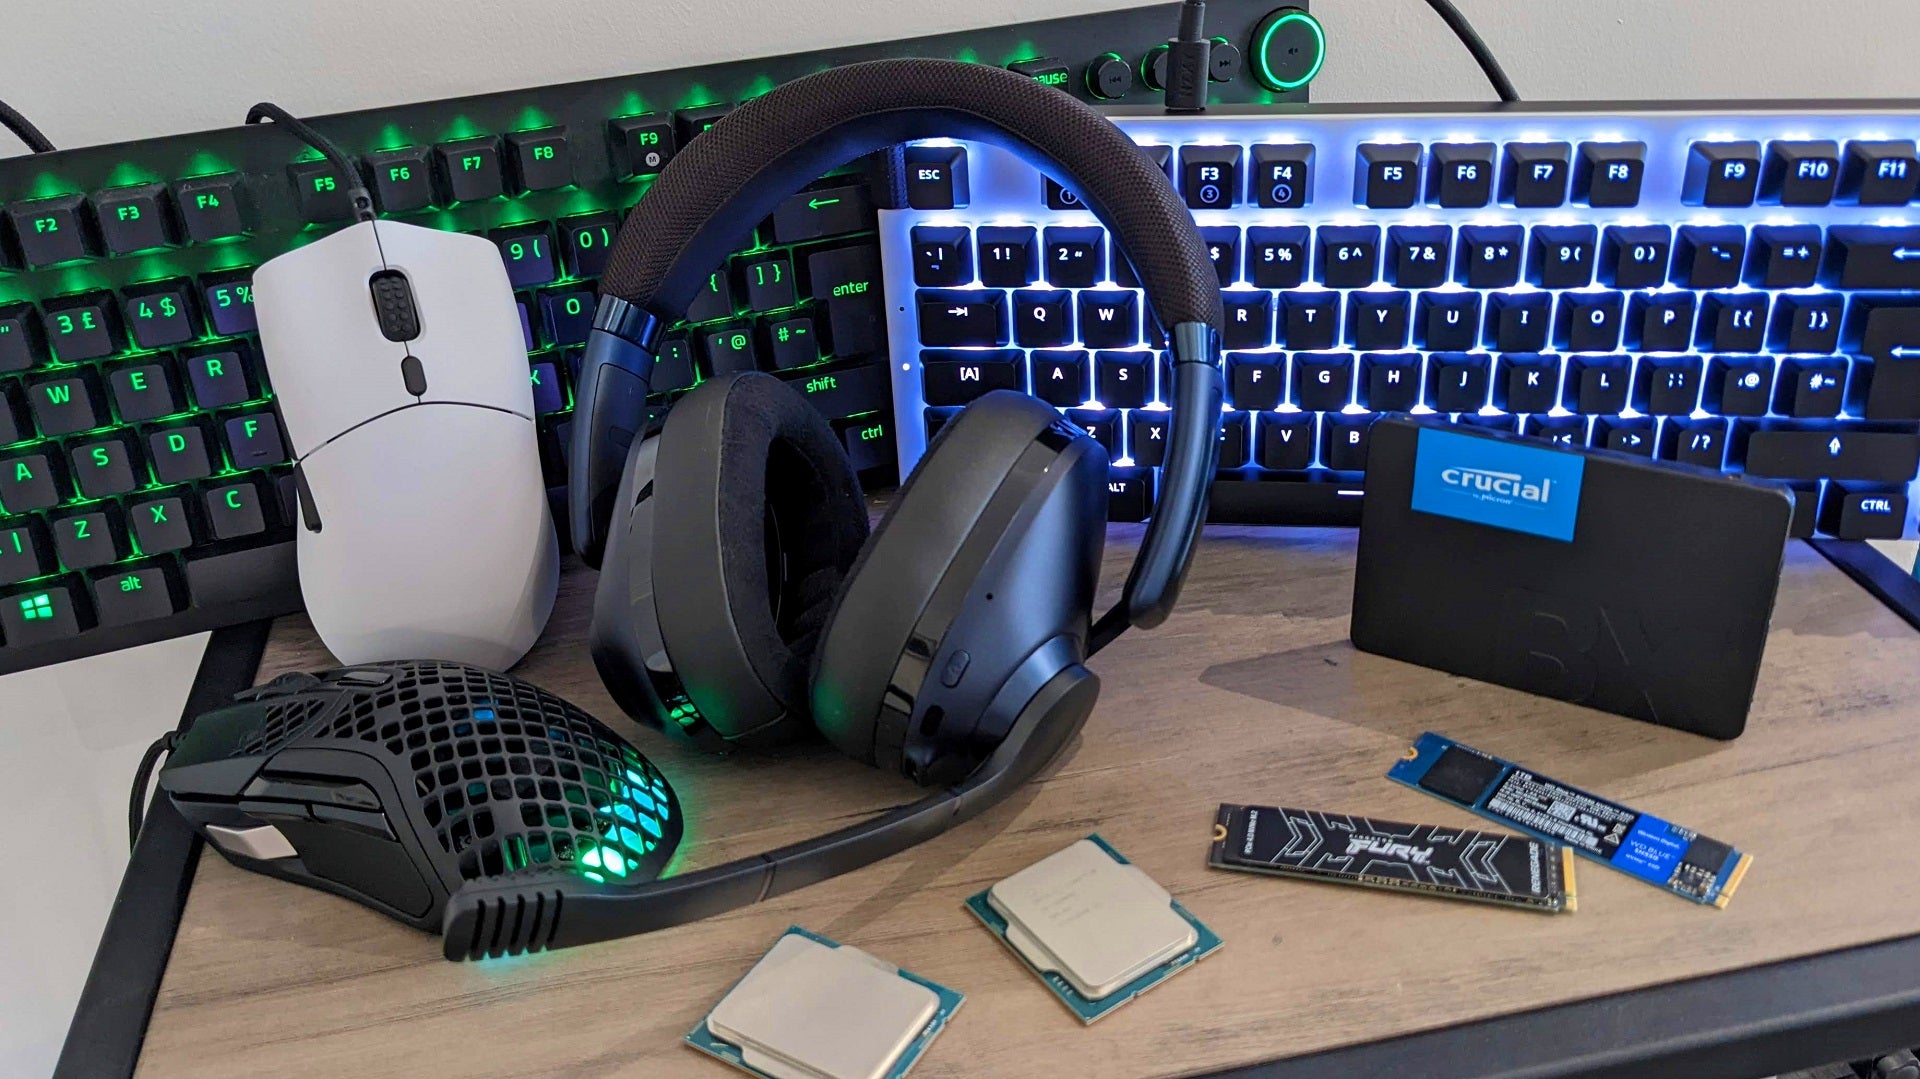 Various PC peripherals and peripherals on a table, including two keyboards, two mice, a headset and three SSDs.